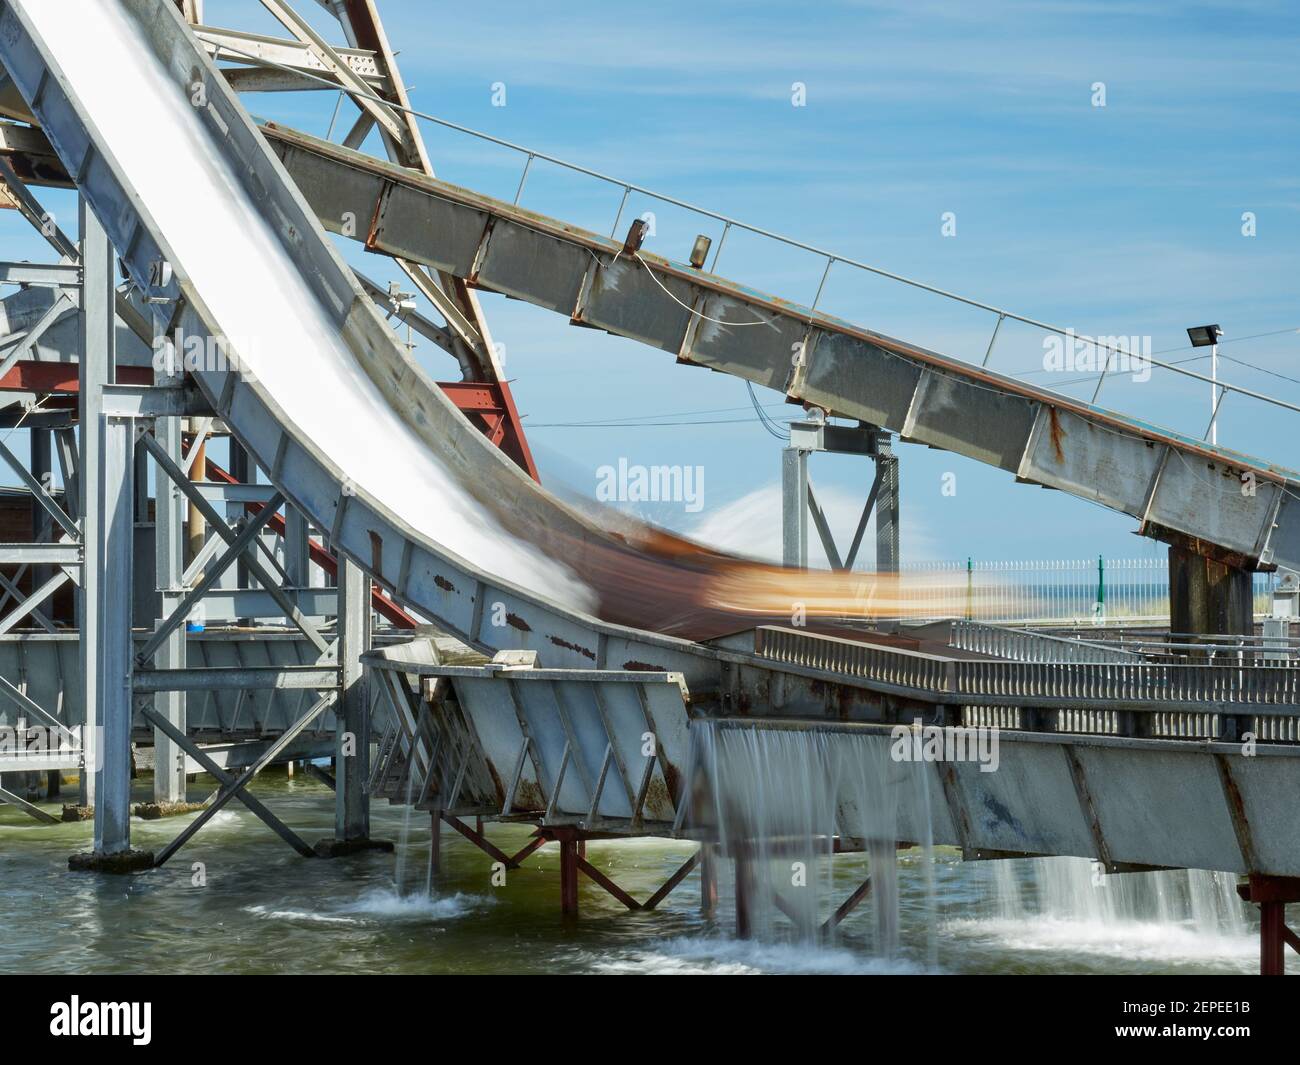 Long exposure of highest drop on Log Flume ride Pleasure beach Great Yarmouth. Soft blurred water & log carriage dropping down the highest drop Stock Photo